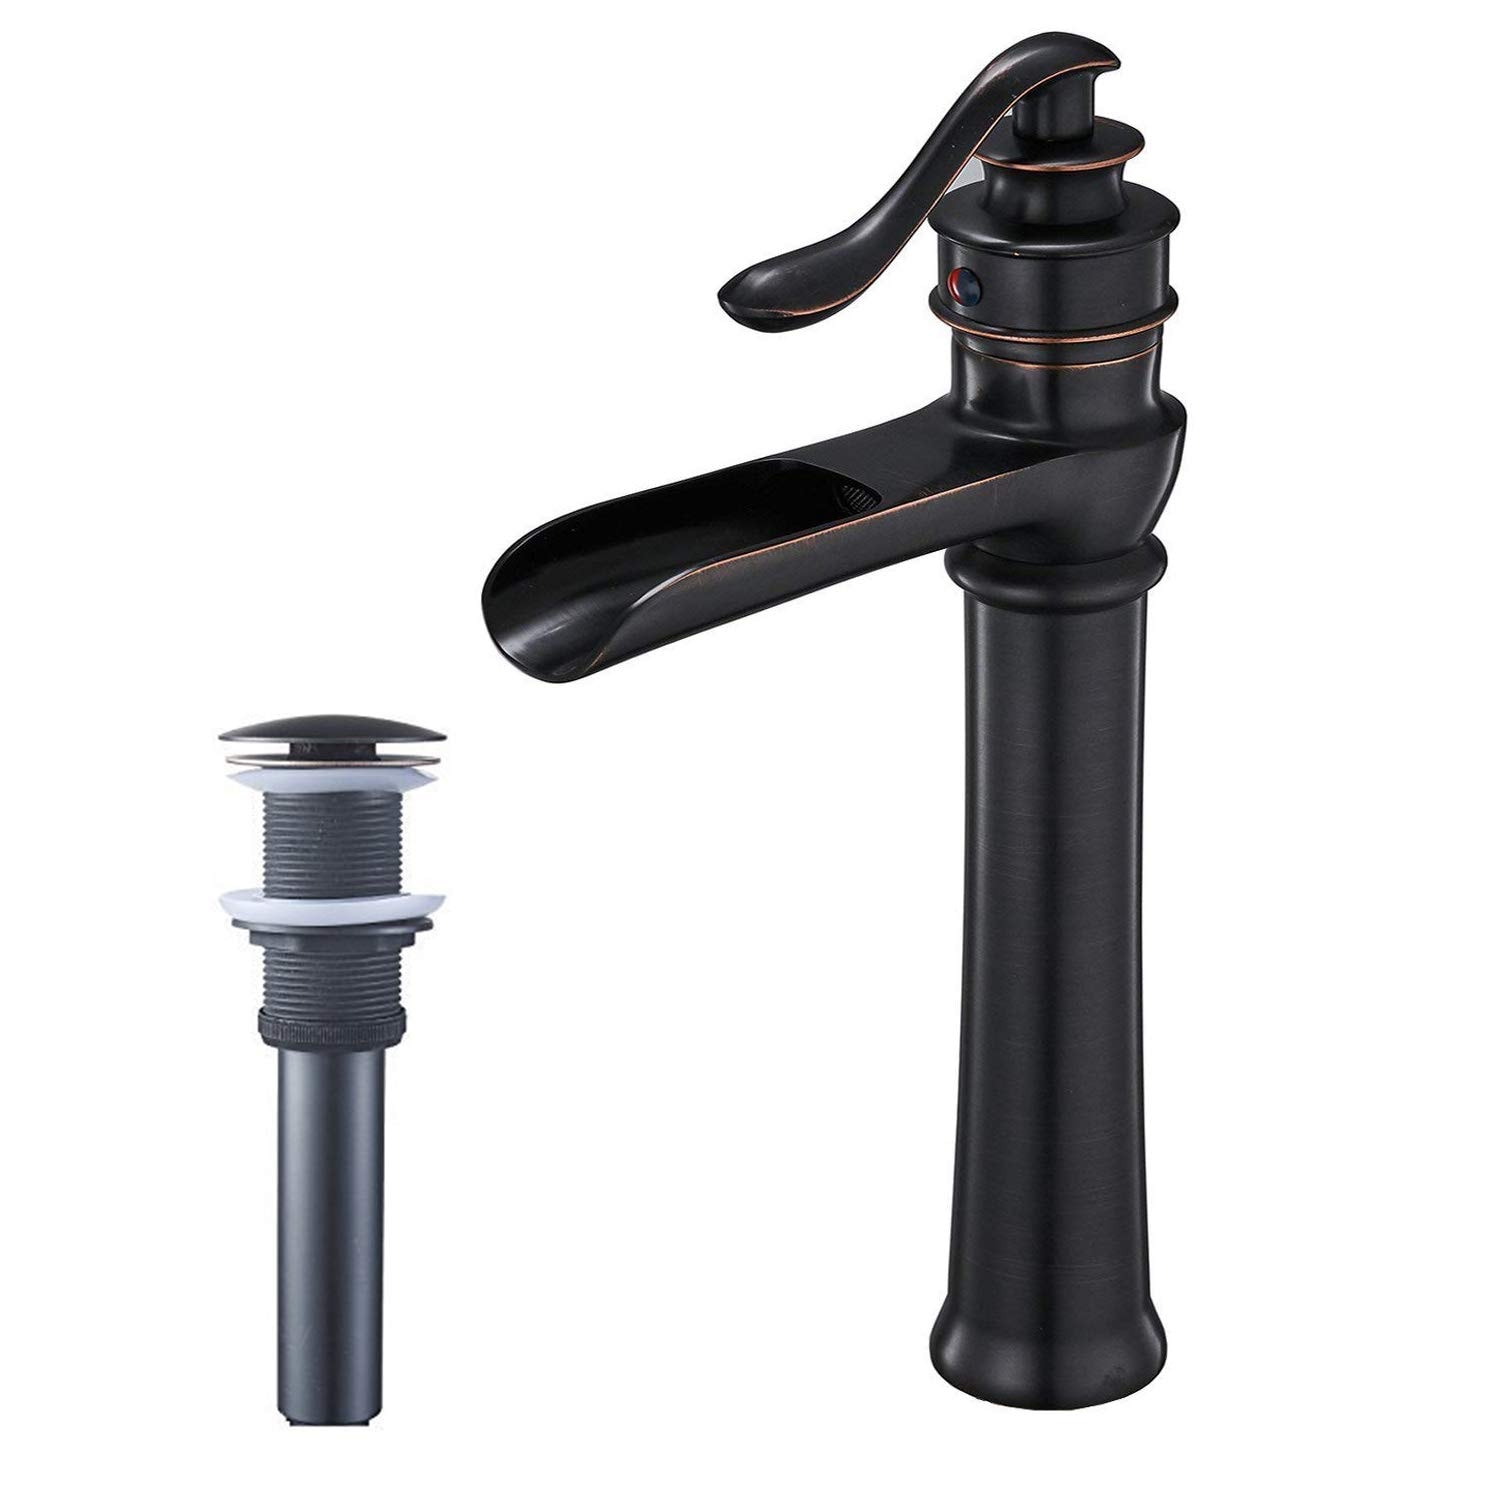 Modern Commercial Single Handle Bathroom Faucet One Hole Mixer Tap Deck Mounted 